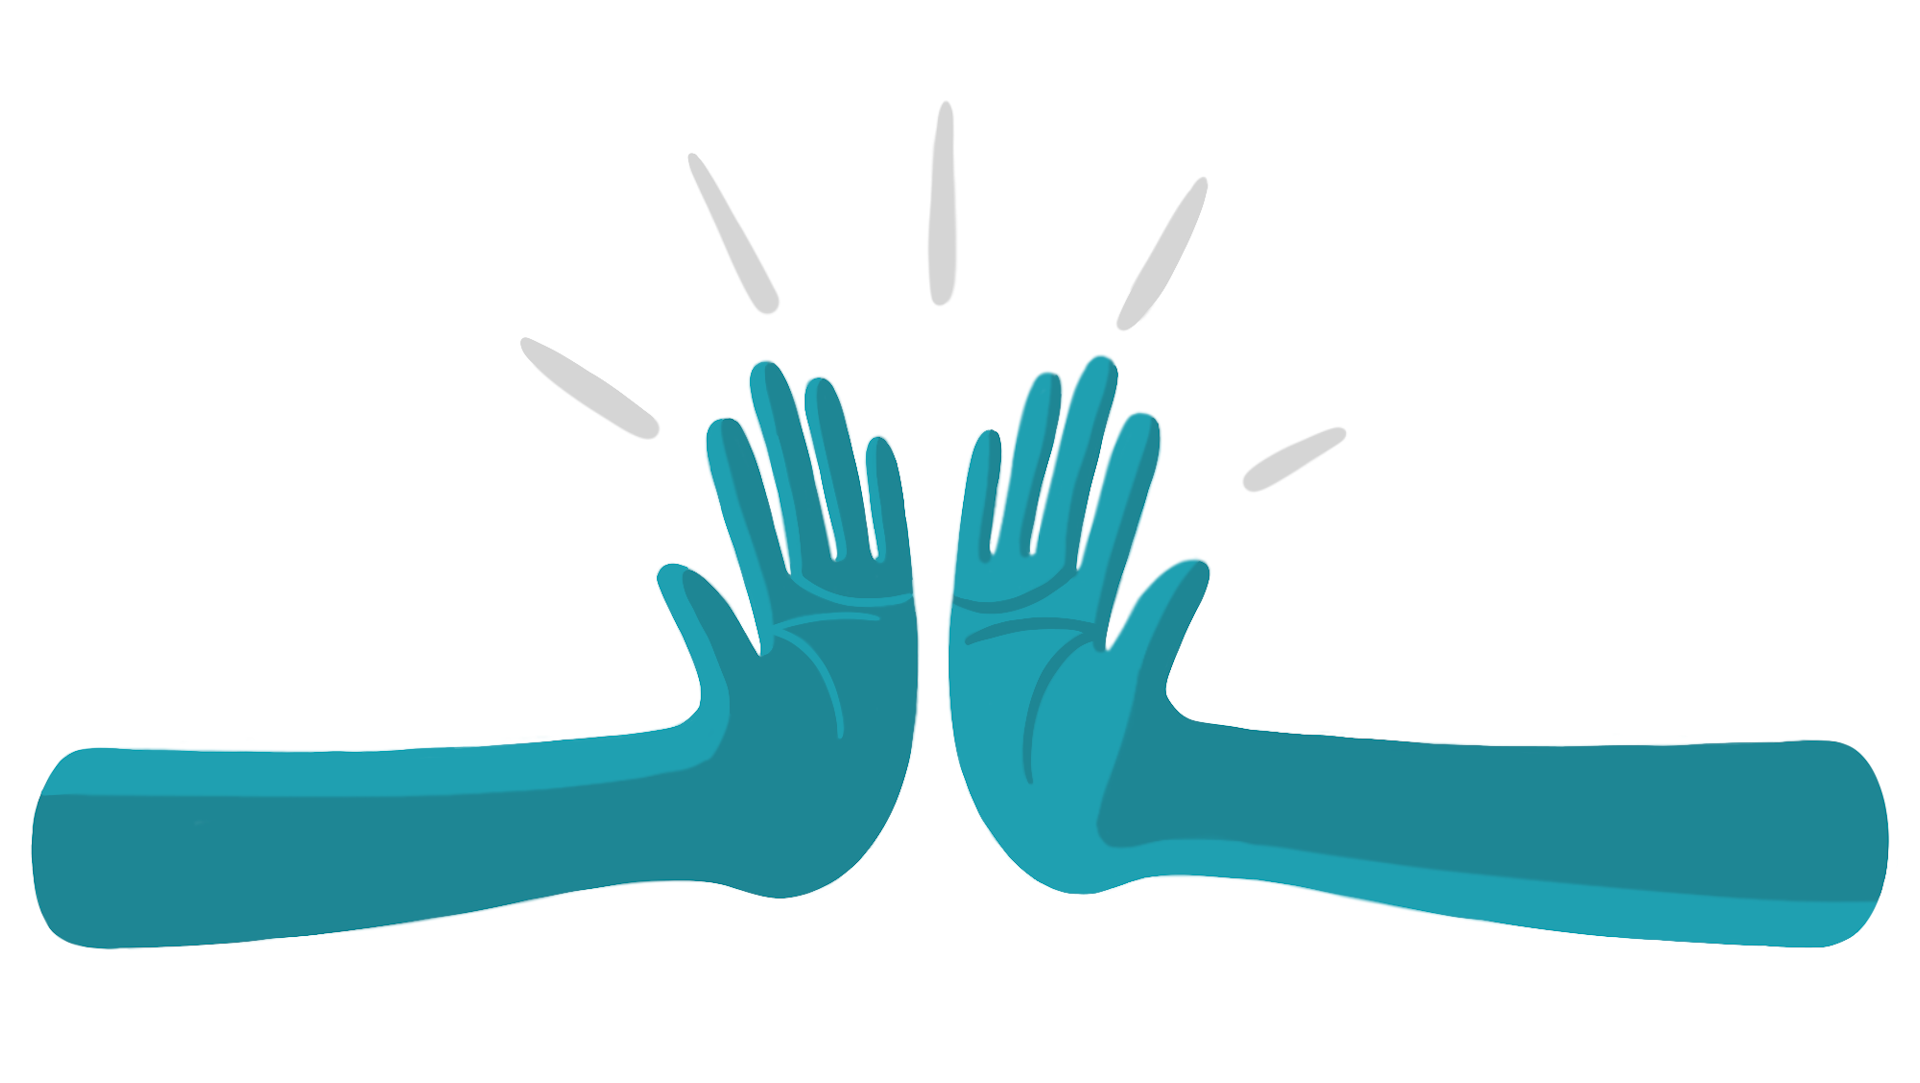 Illustration of two blue hands high fiving